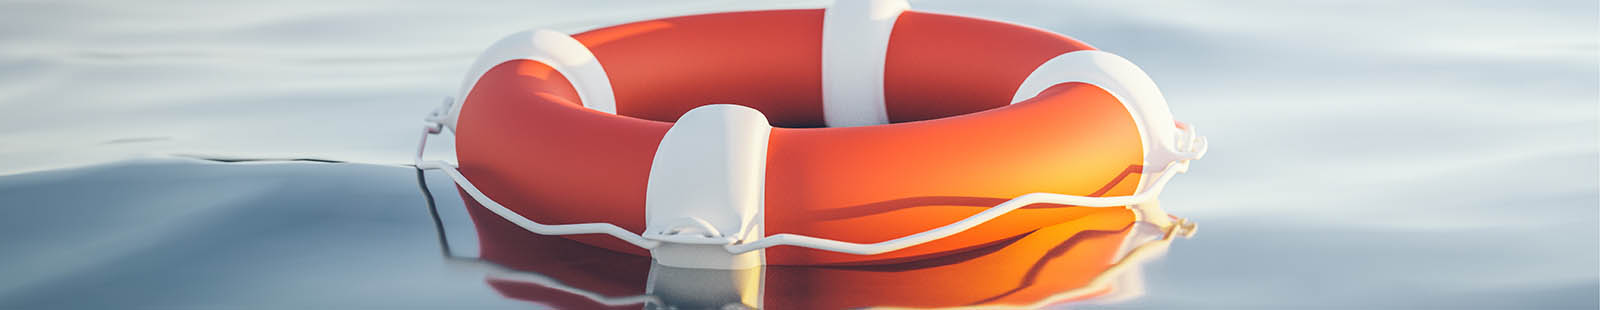 Life preserver on water.